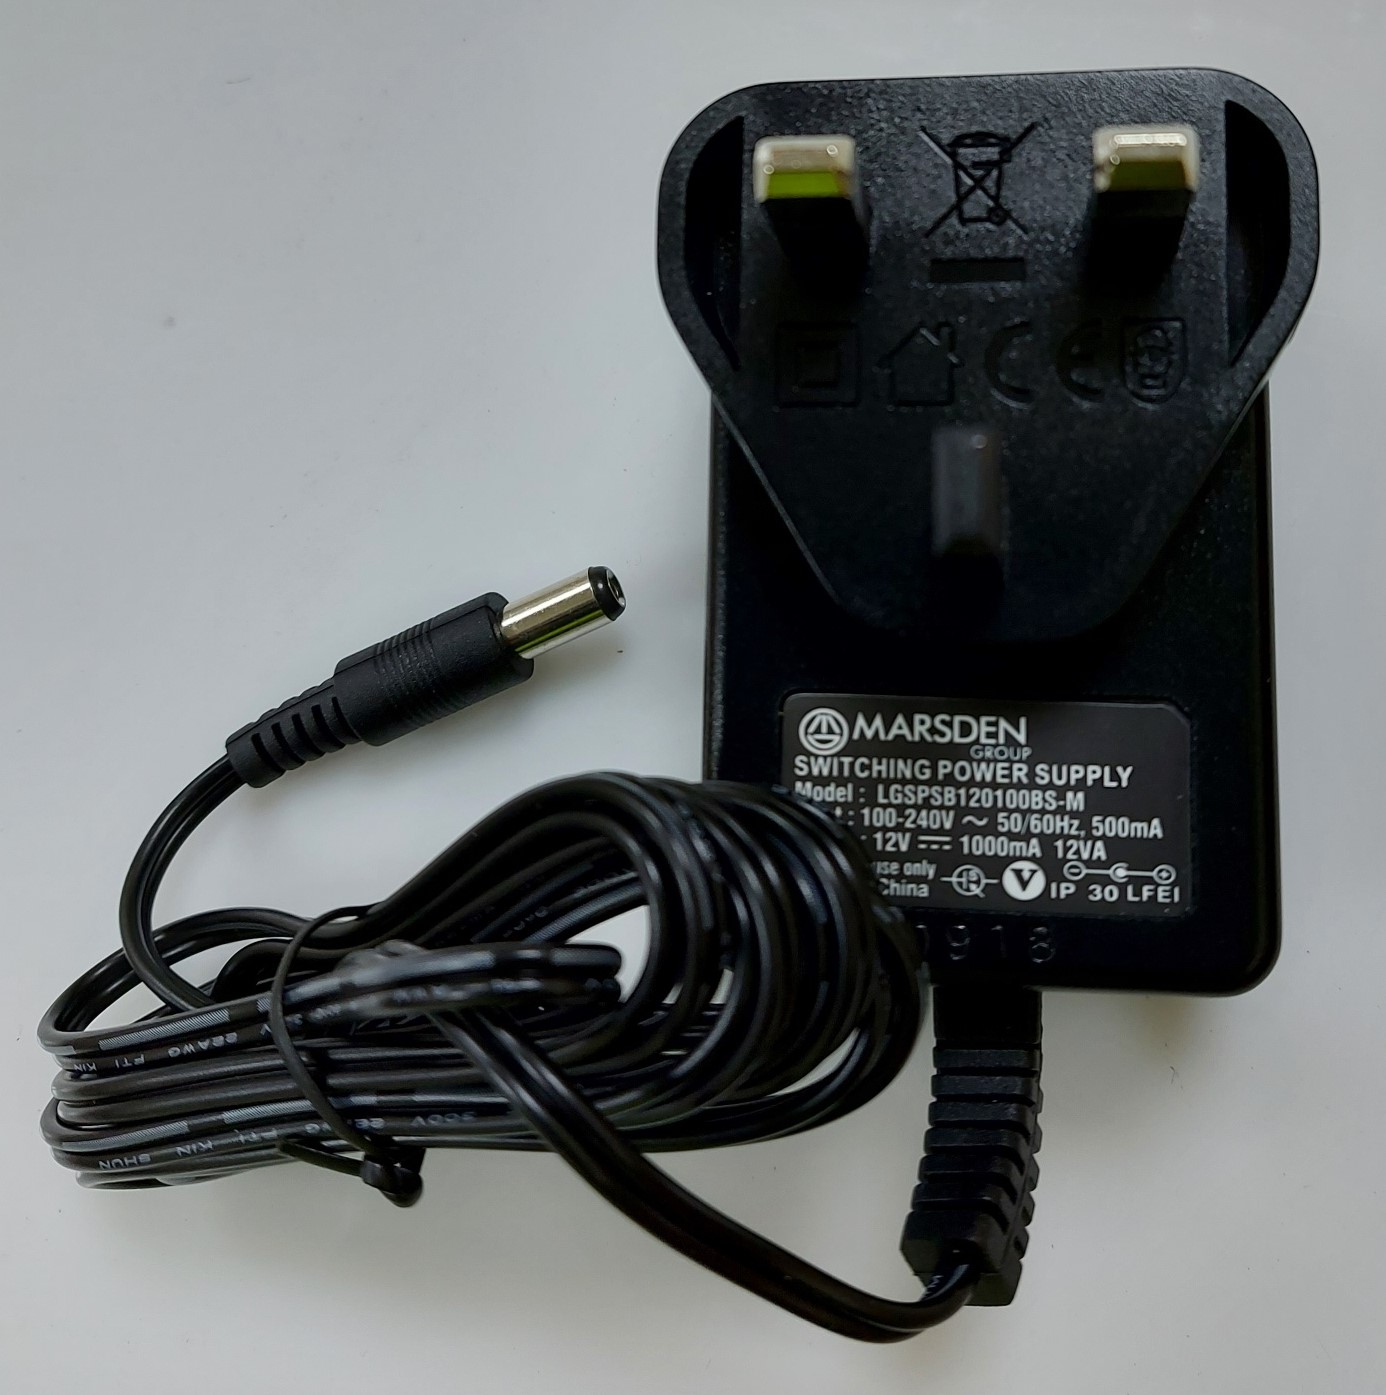 Mains Charger/Adaptor for Marsden/Seca Chair/Hoist Scales - Double Screen Version